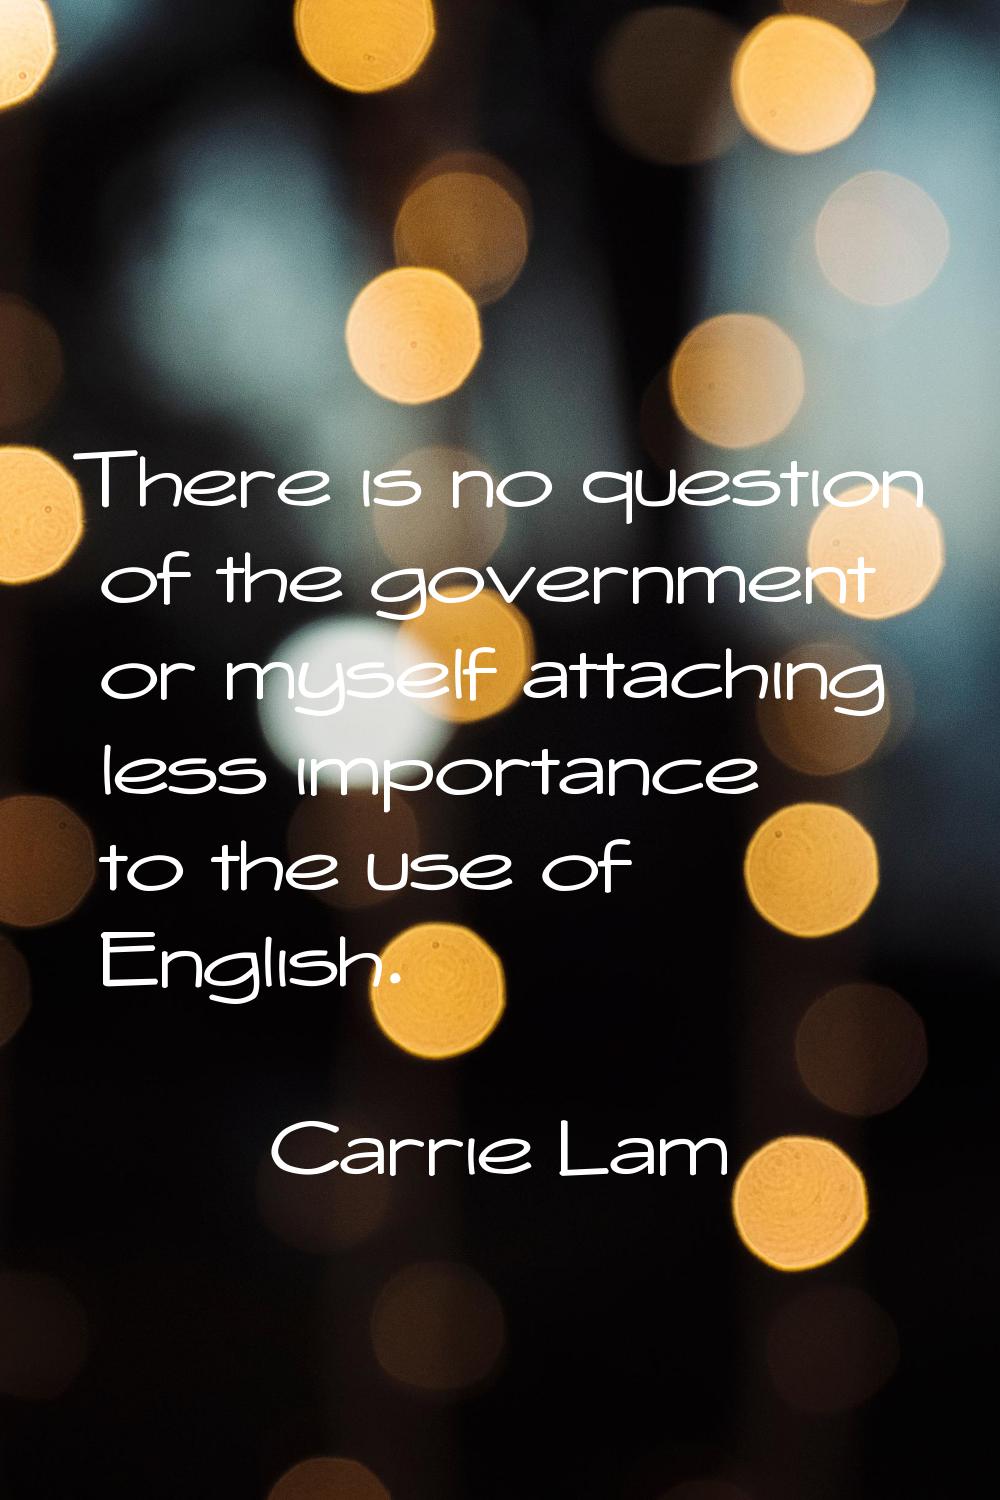 There is no question of the government or myself attaching less importance to the use of English.